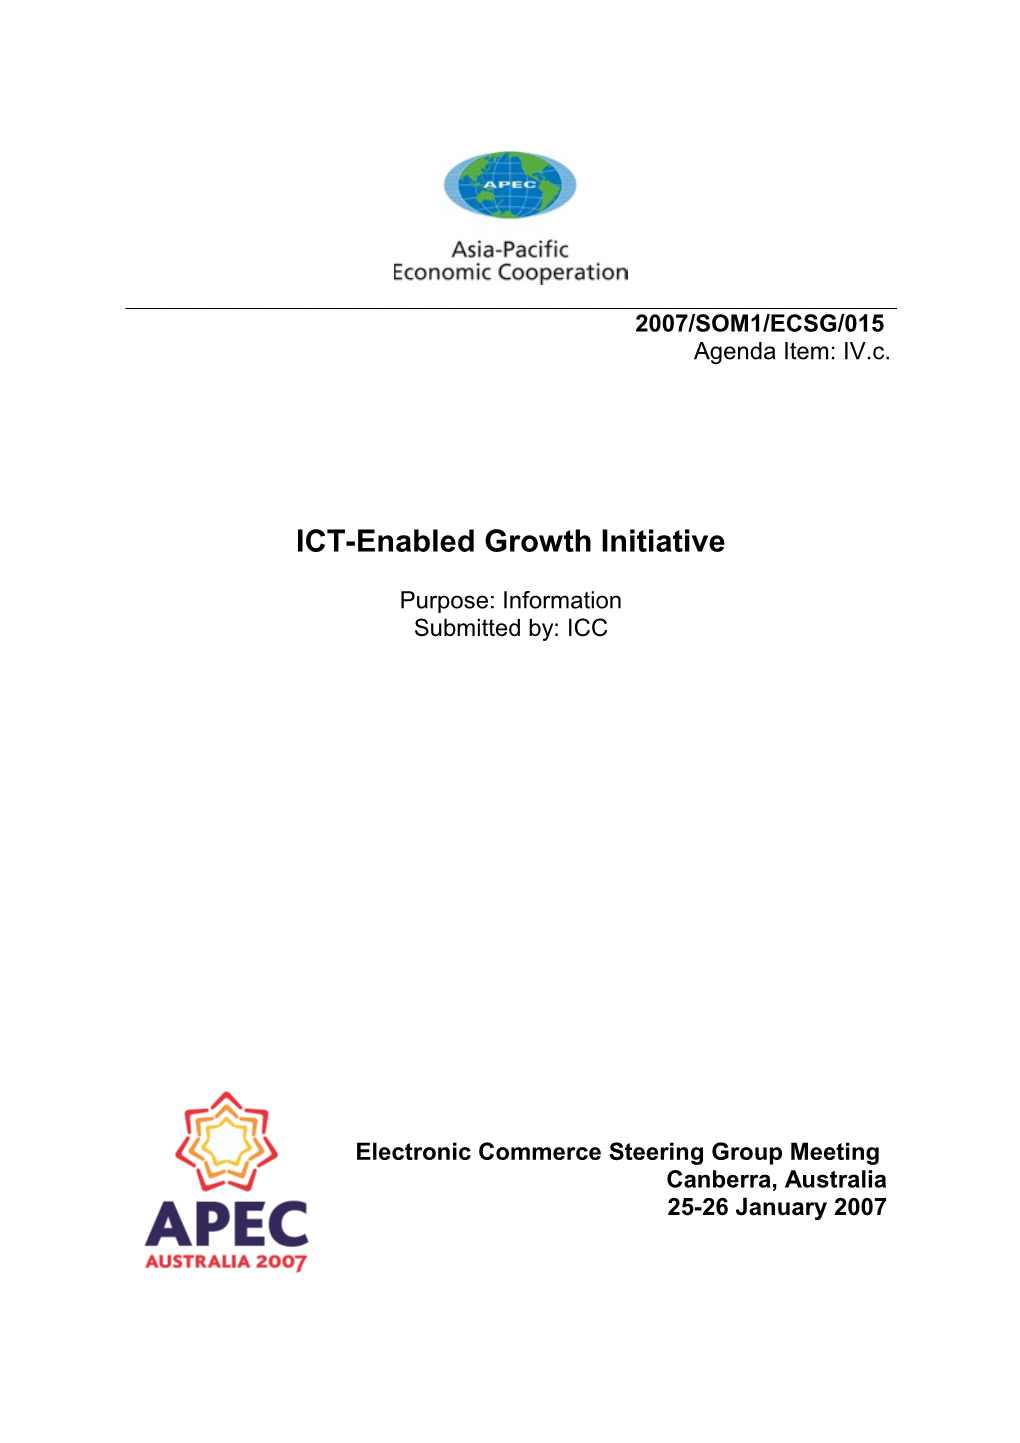 ICT-Enabled Growth Initiative